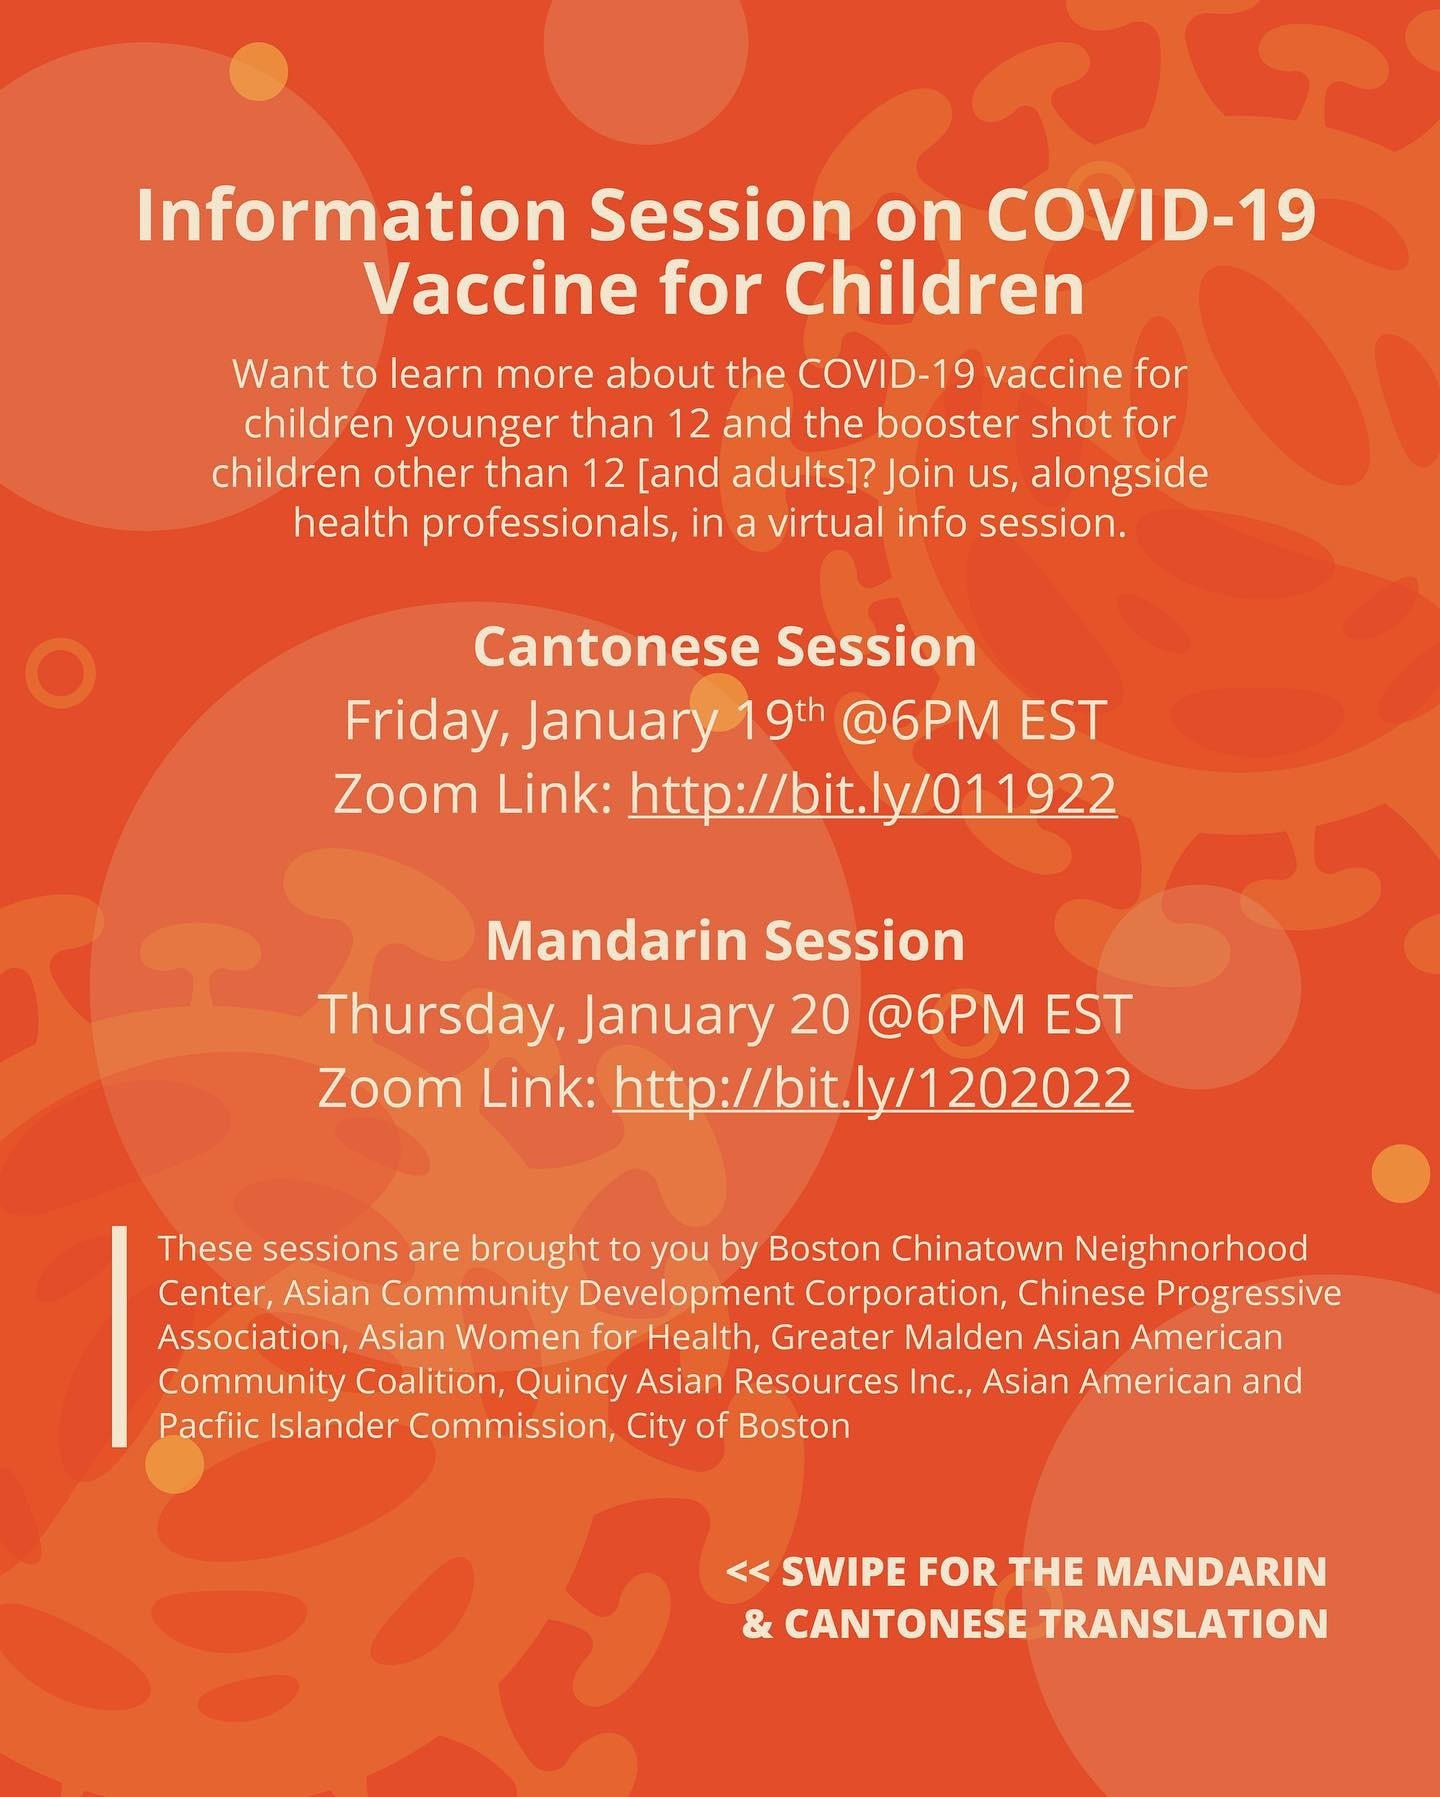 Info Session on COVID-19 Vaccine for Children: Jan. 19th & 20th